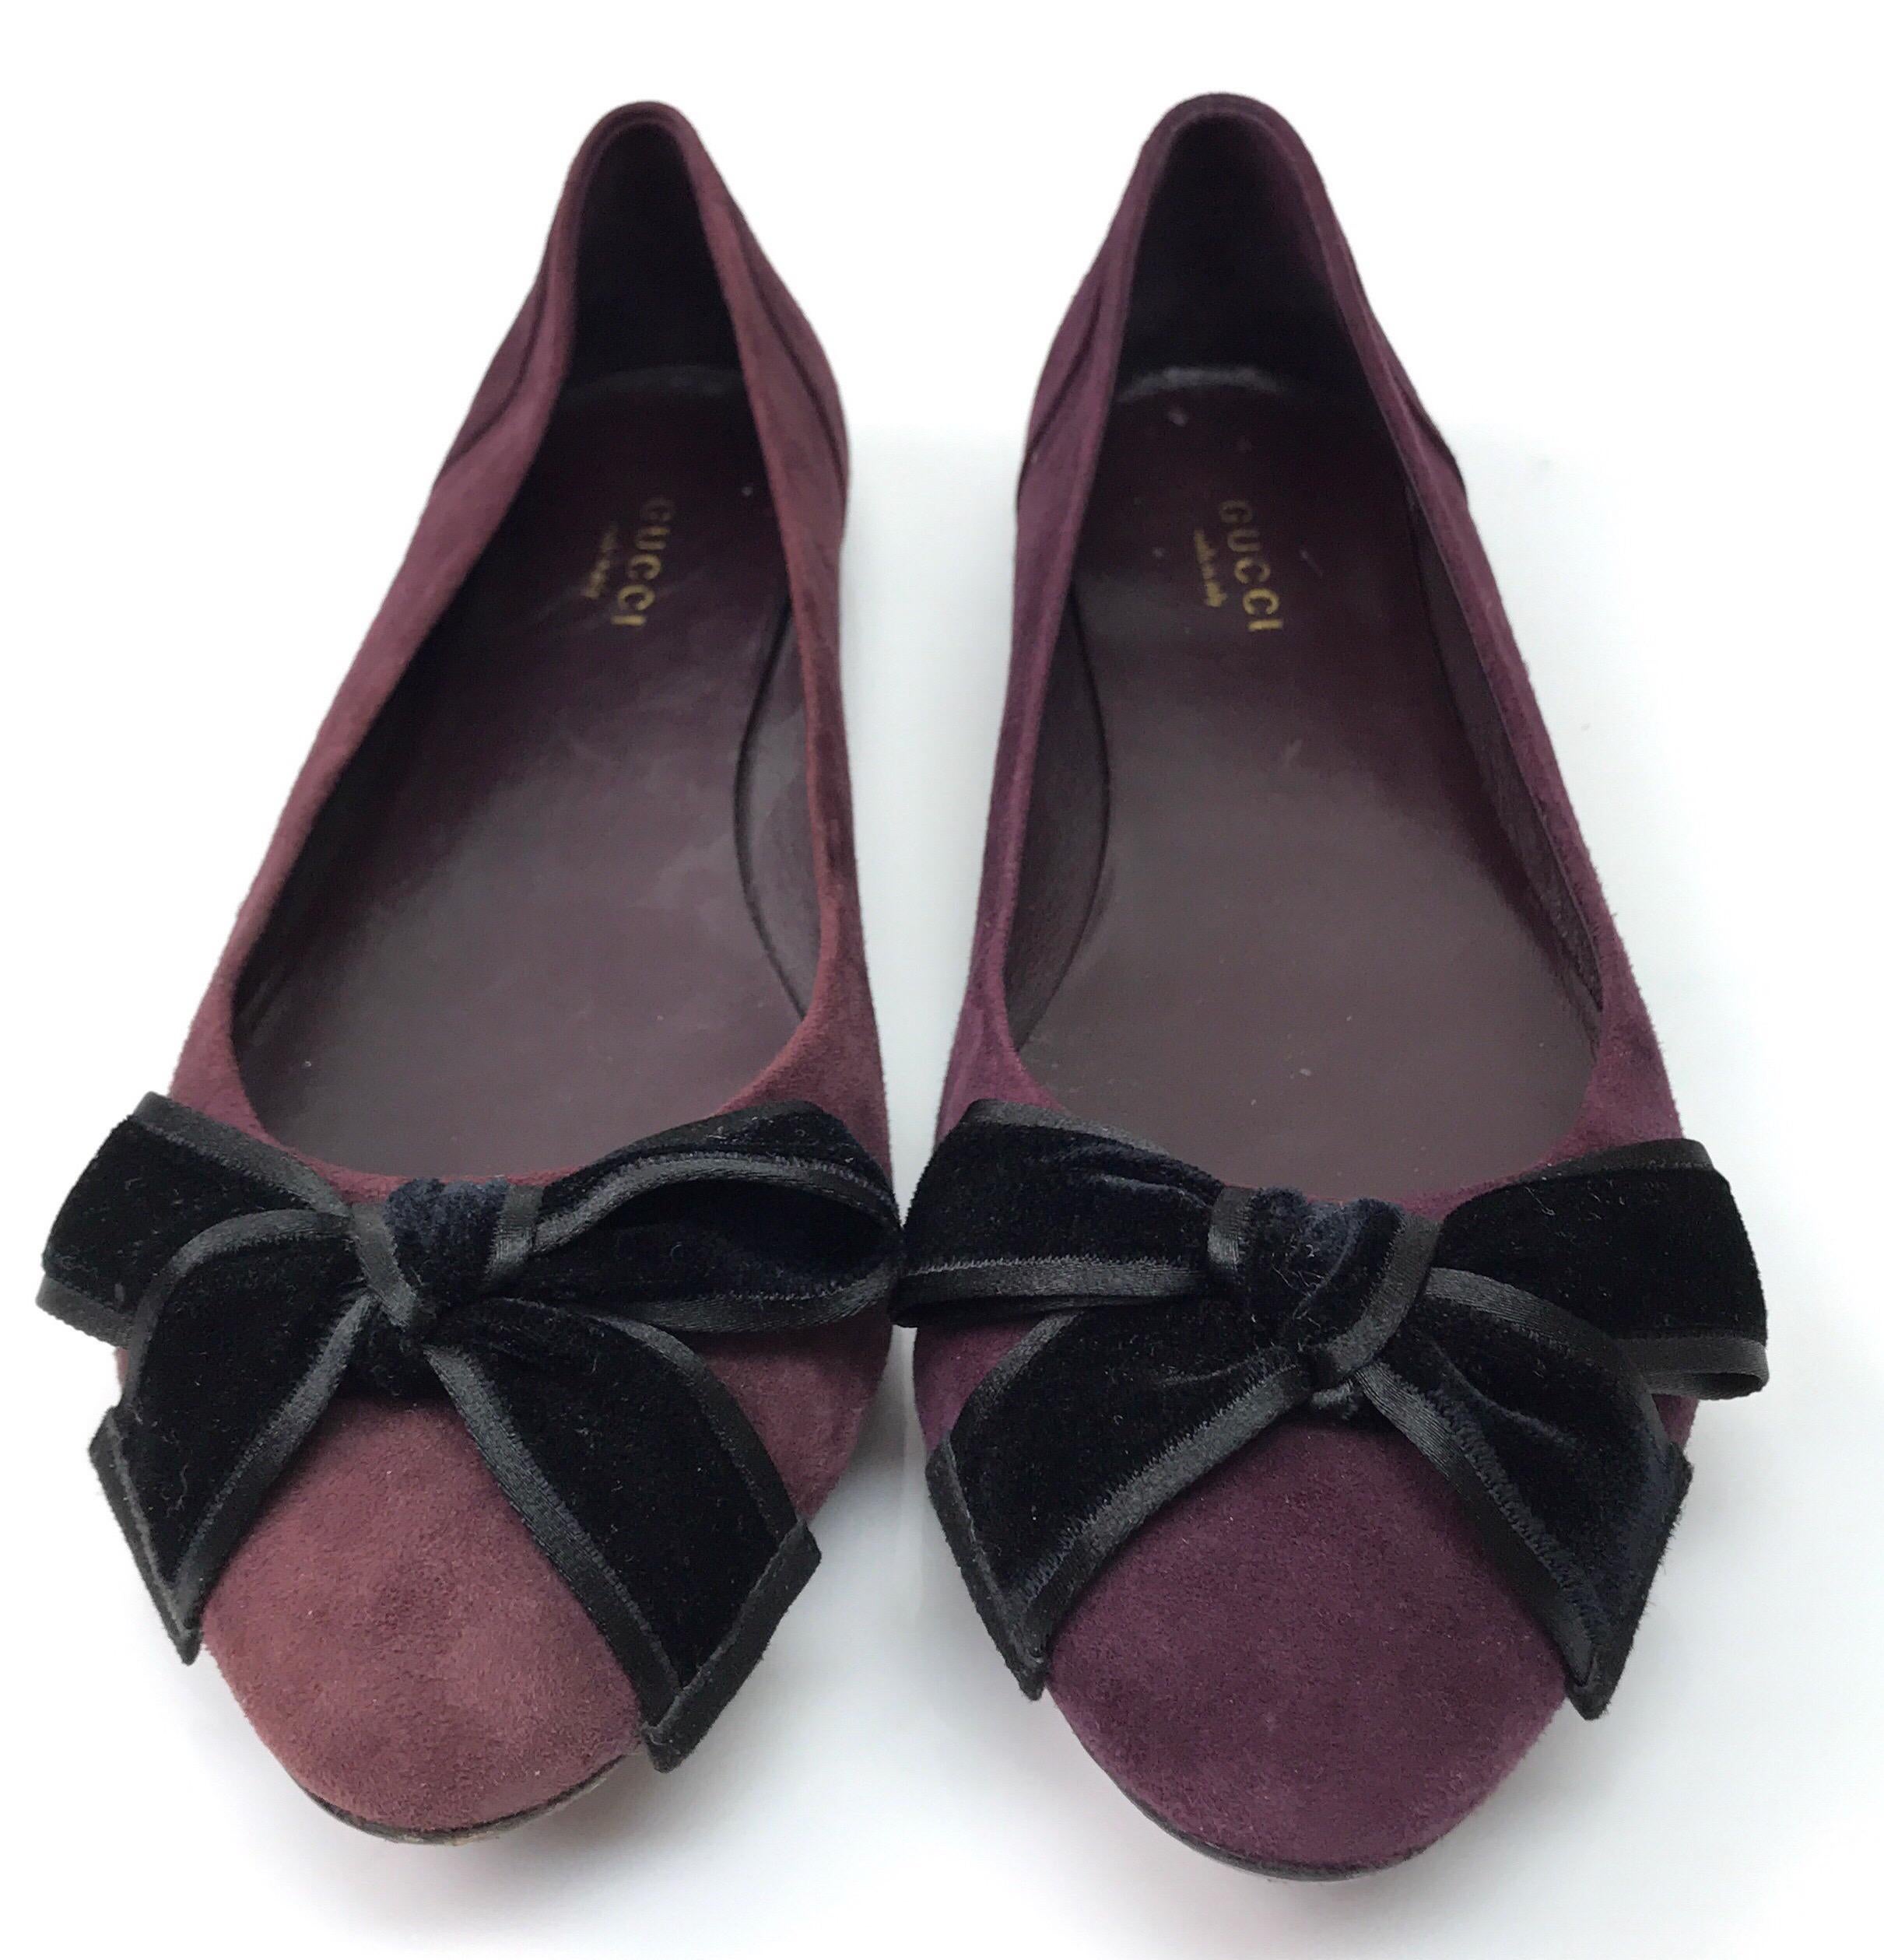 Gucci Viola Purple Suede Flats with Velvet Bow - 38.5. These stunning Gucci flats are in great condition. They show minor wear on the bottom of the shoe. They are made of purple suede throughout and have a black velvet bow on the toe. The front of